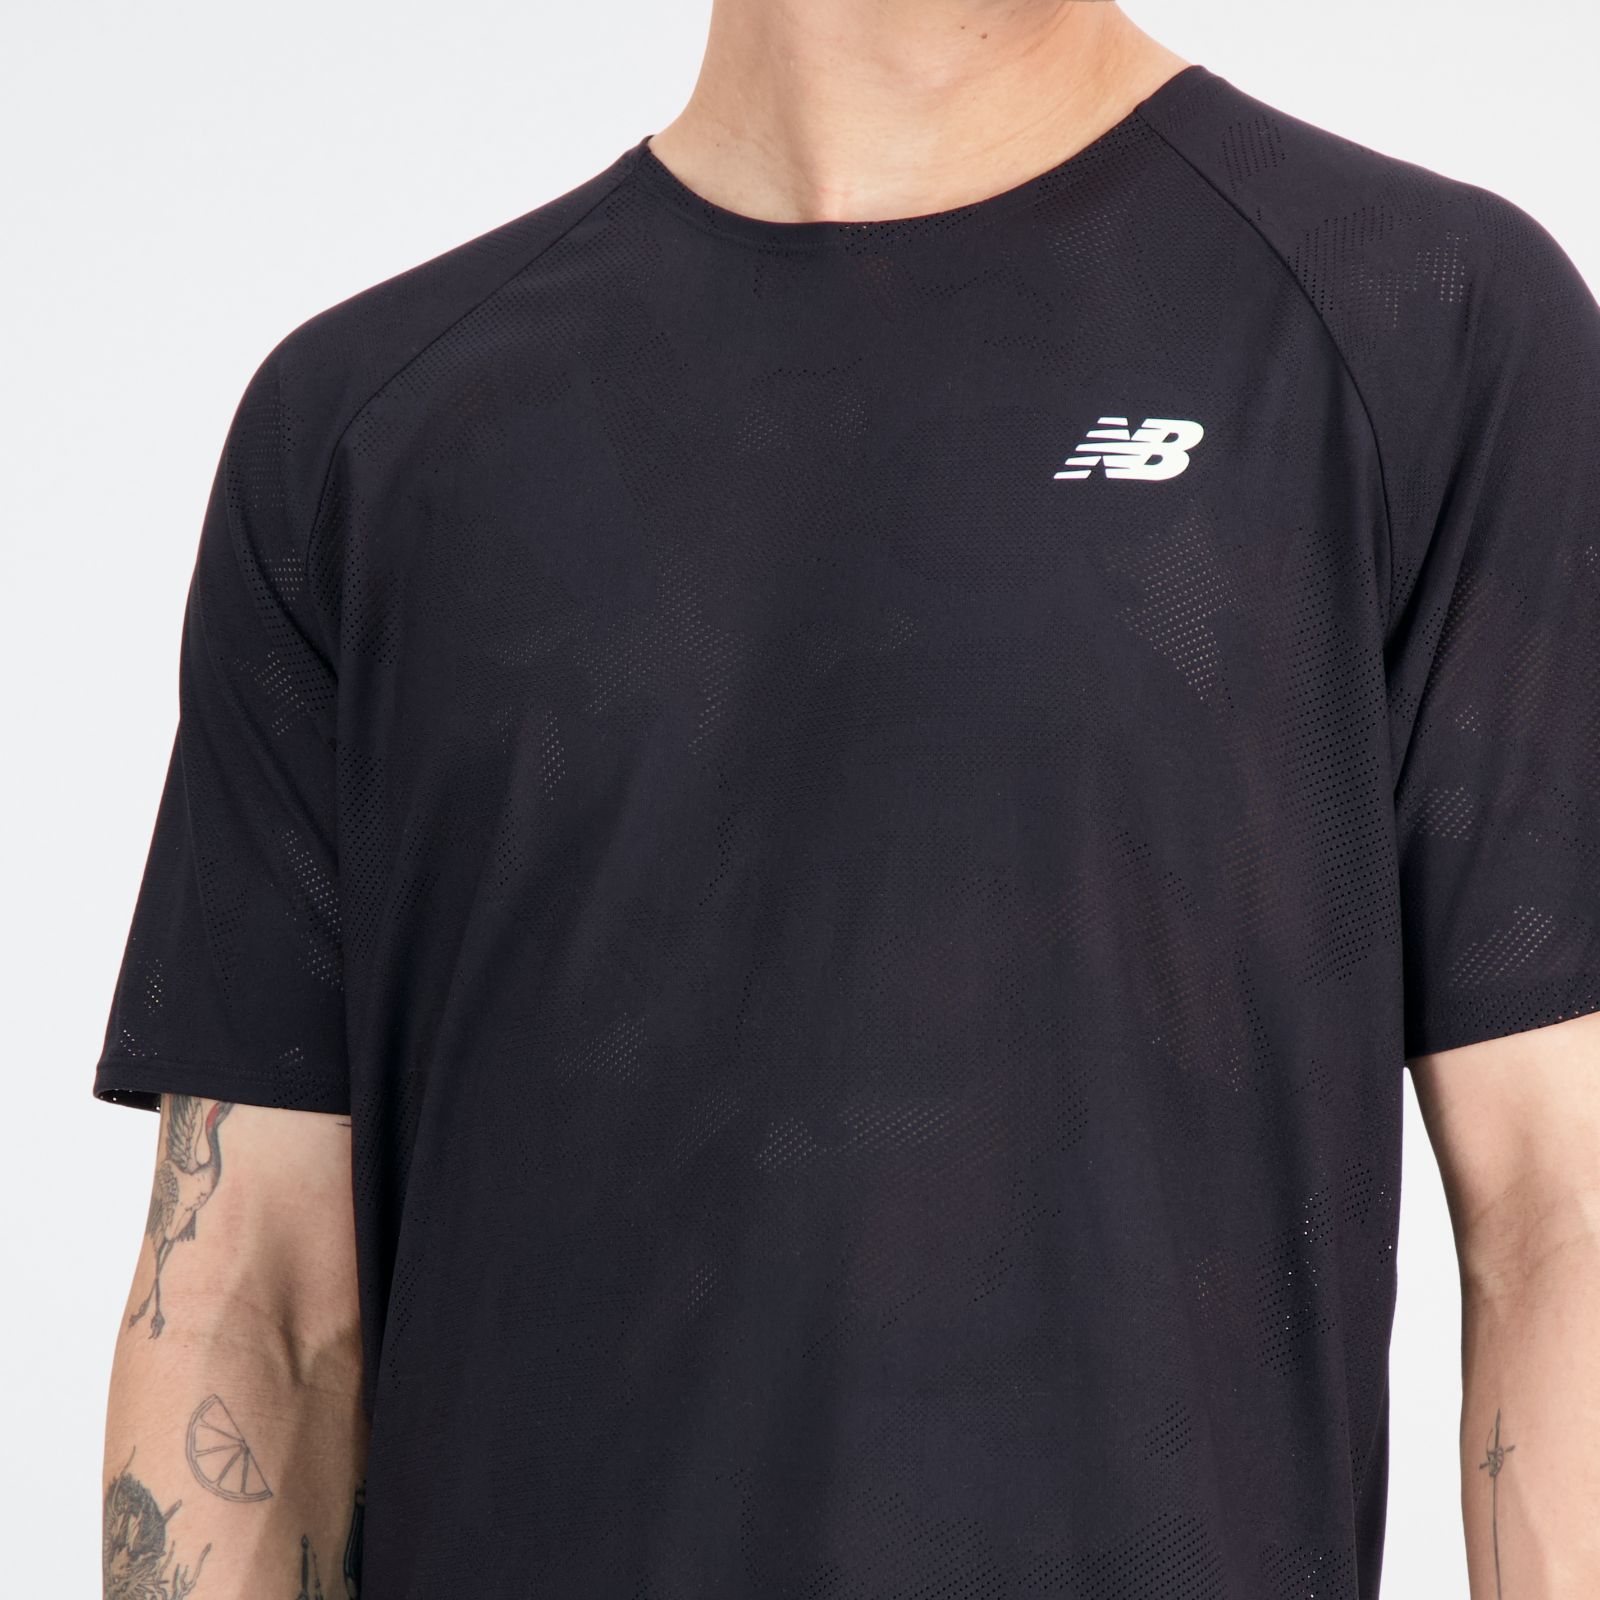  New Balance Men's Q Speed Fuel Jacquard Short Sleeve, Dynomite  Heather, X-Small : Clothing, Shoes & Jewelry